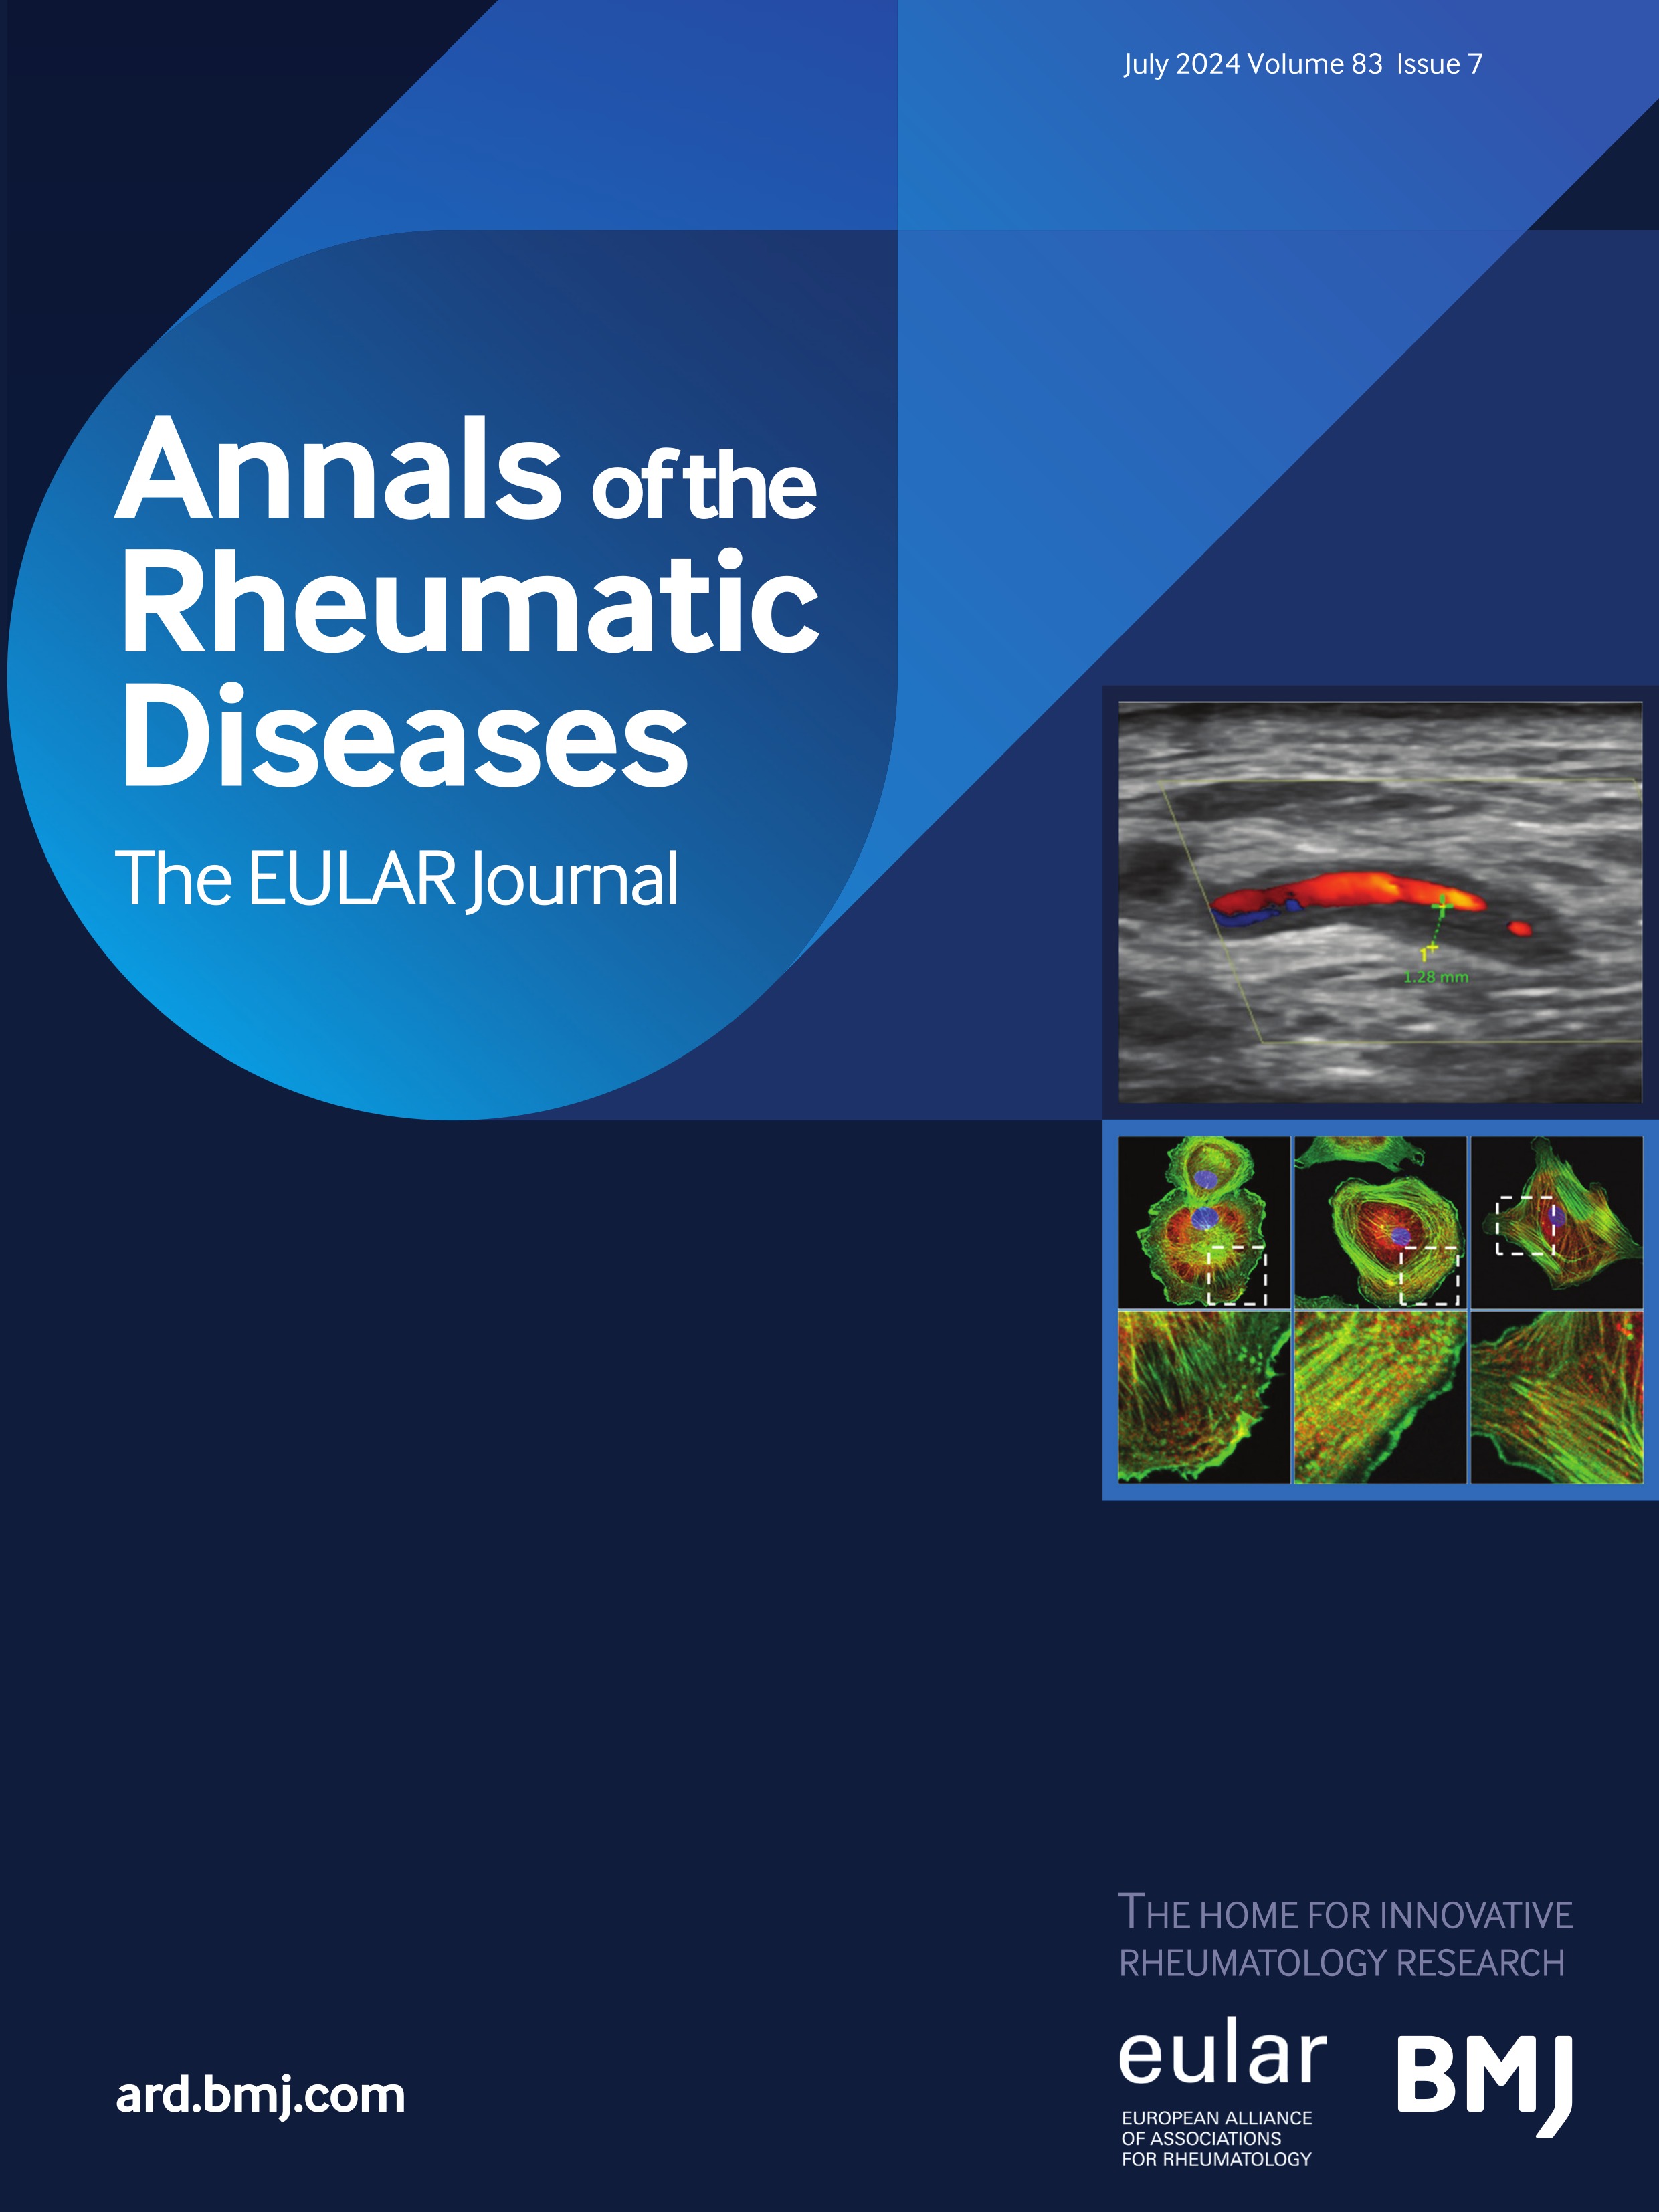 Power Doppler signal at the enthesis and bone erosions are the most discriminative OMERACT ultrasound lesions for SpA: results from the DEUS (Defining Enthesitis on Ultrasound in Spondyloarthritis) multicentre study